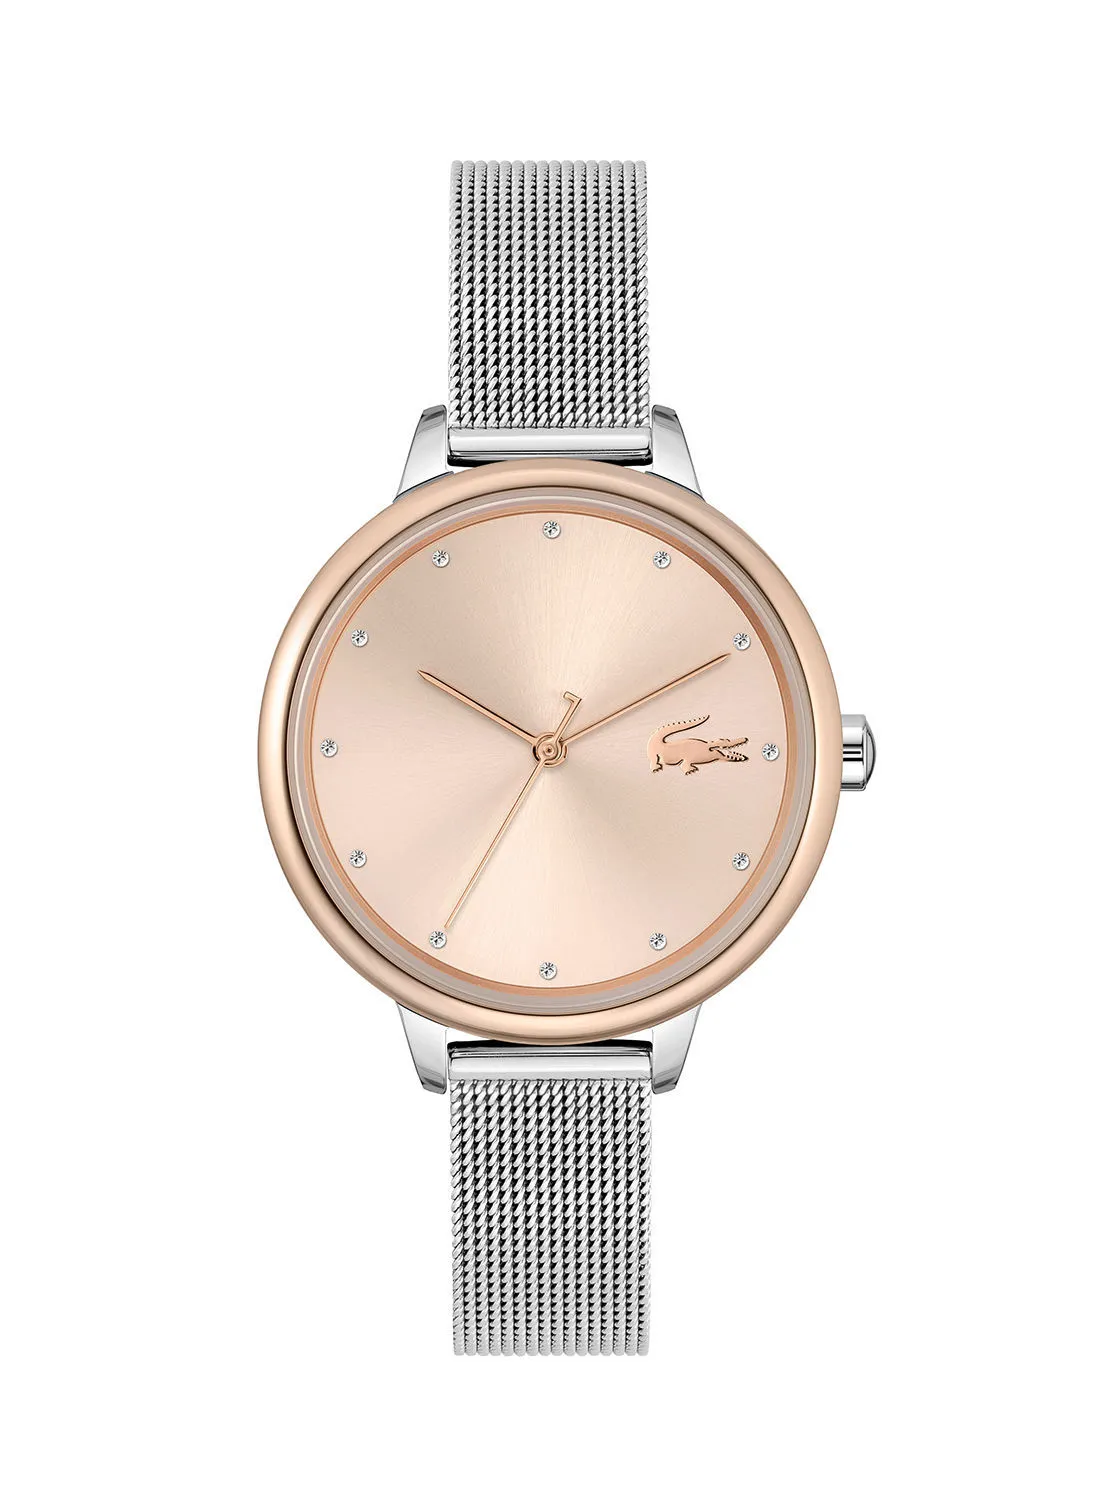 LACOSTE Women's Cannes Light Carnation Gold Dial Watch - 2001202